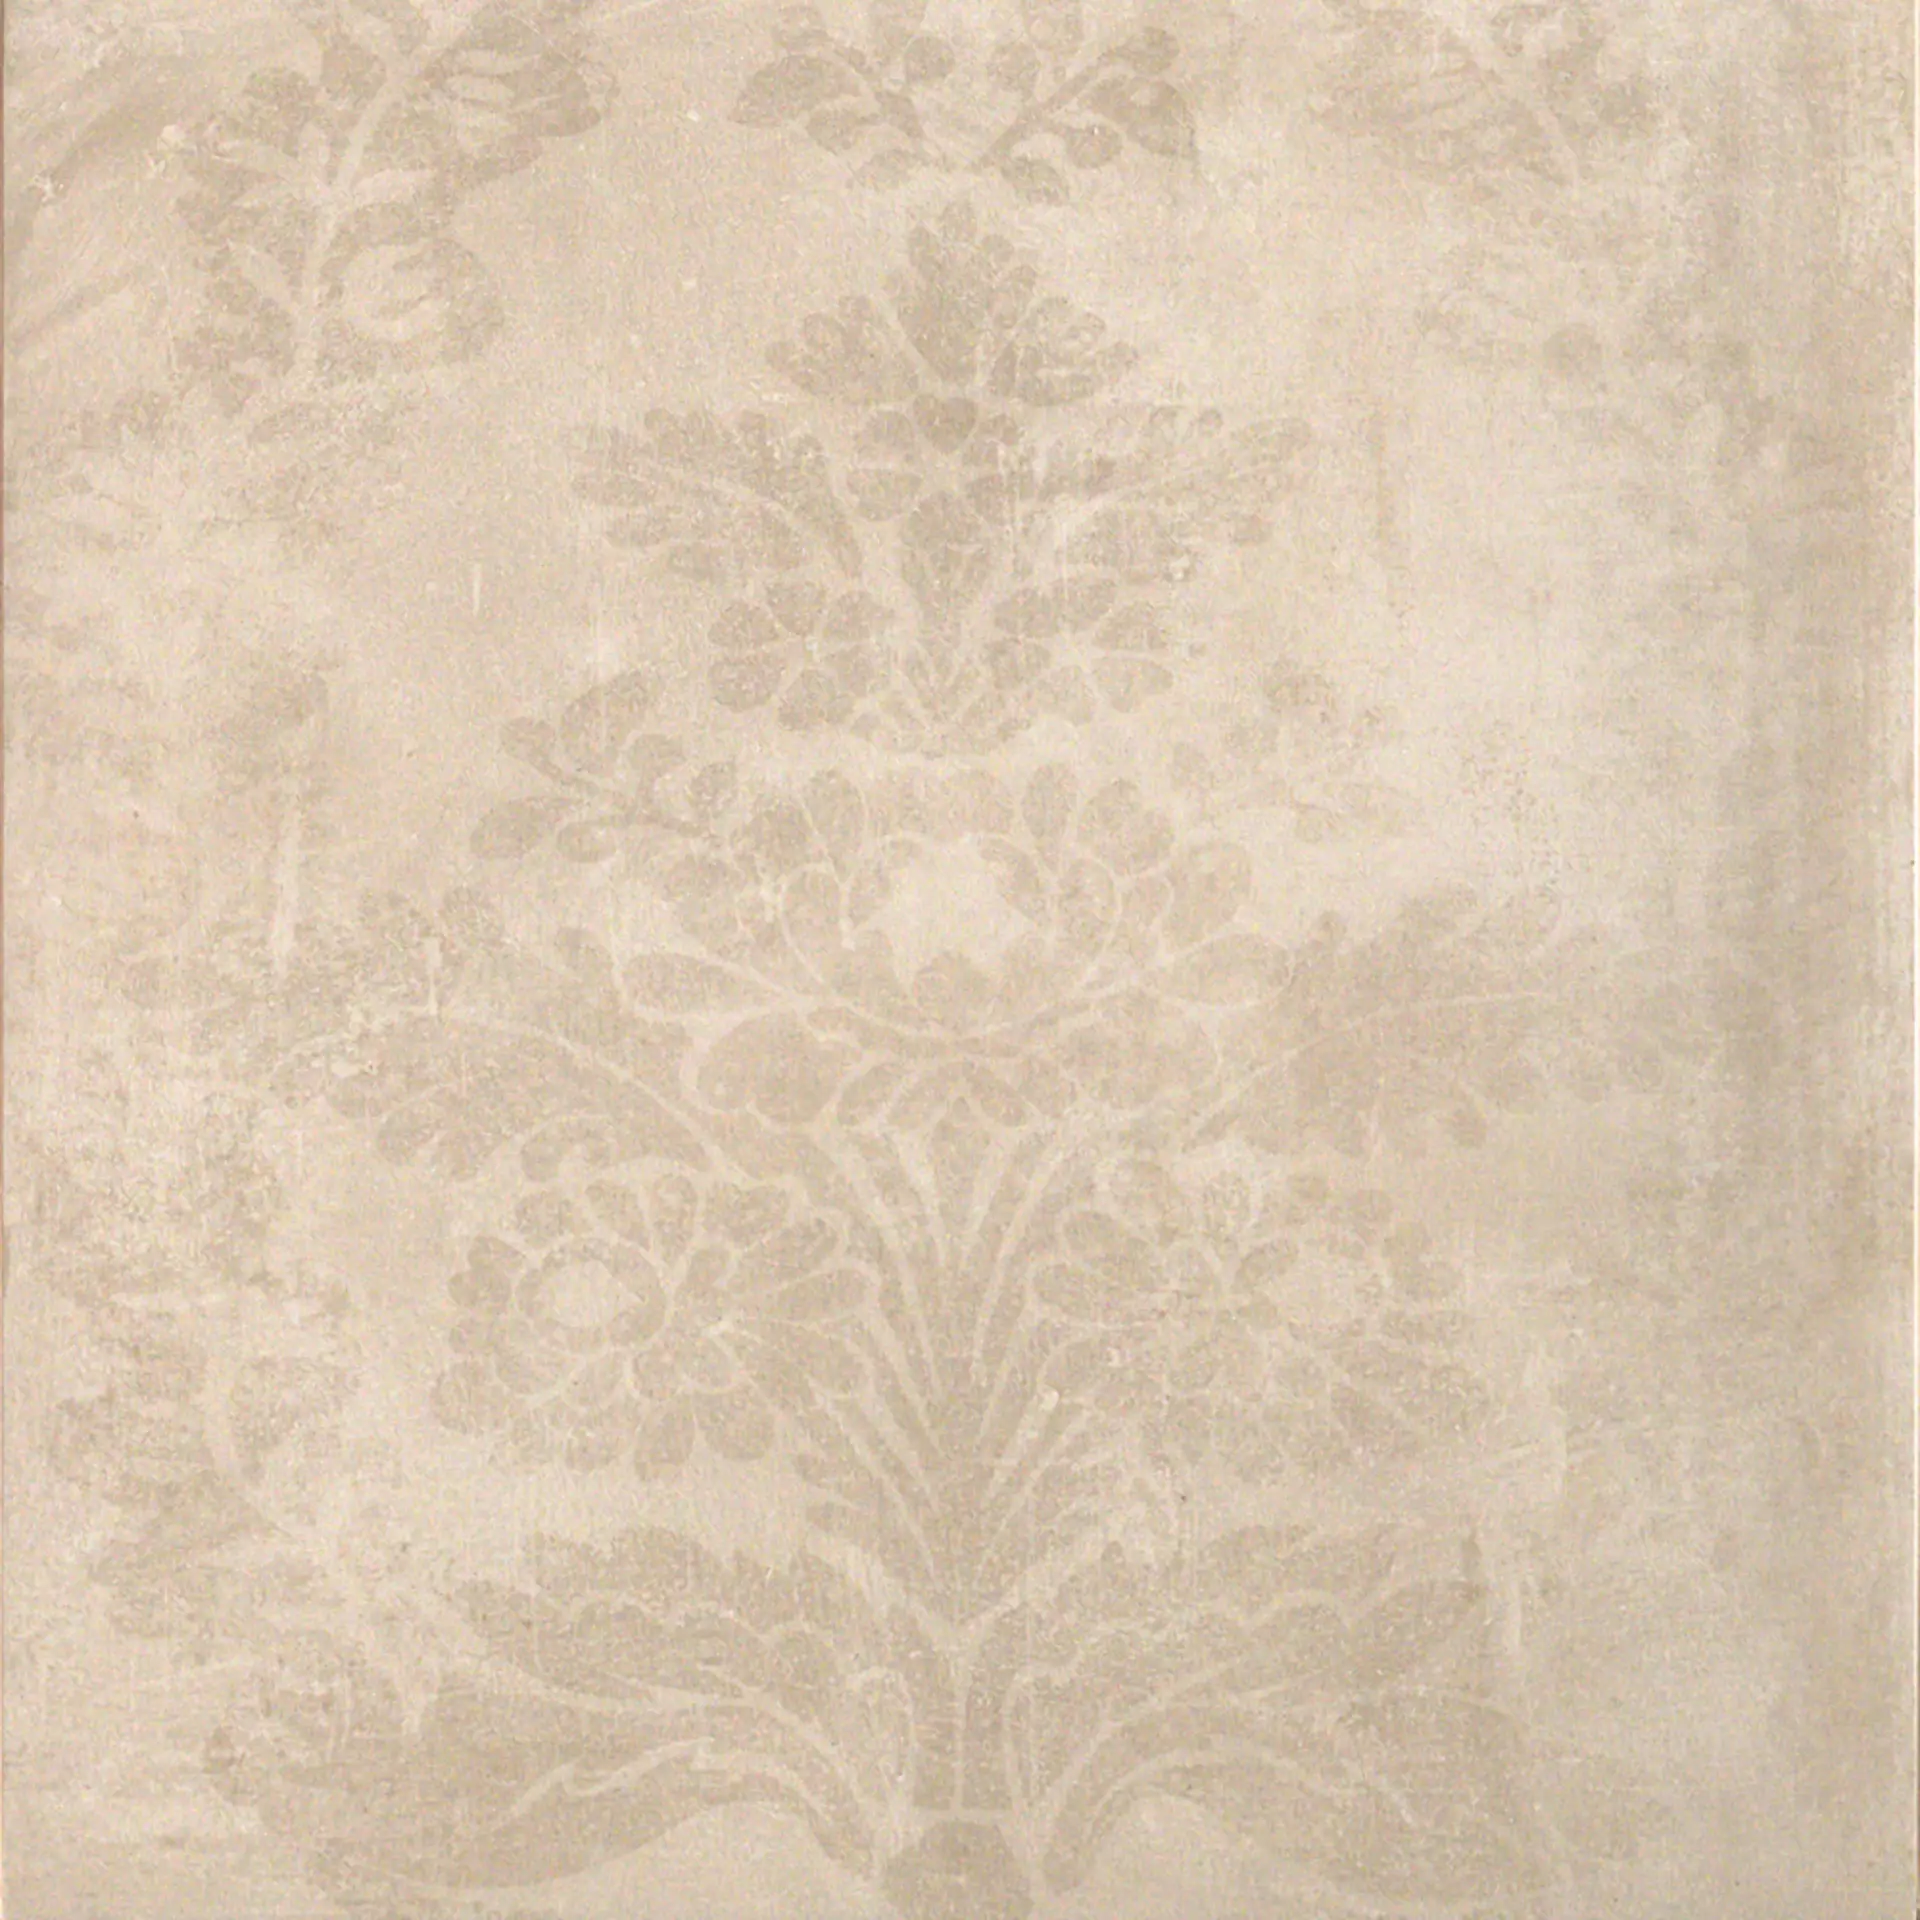 Fondovalle Portland Helen Natural Decorated PTL391 60x60cm rectified 8,5mm